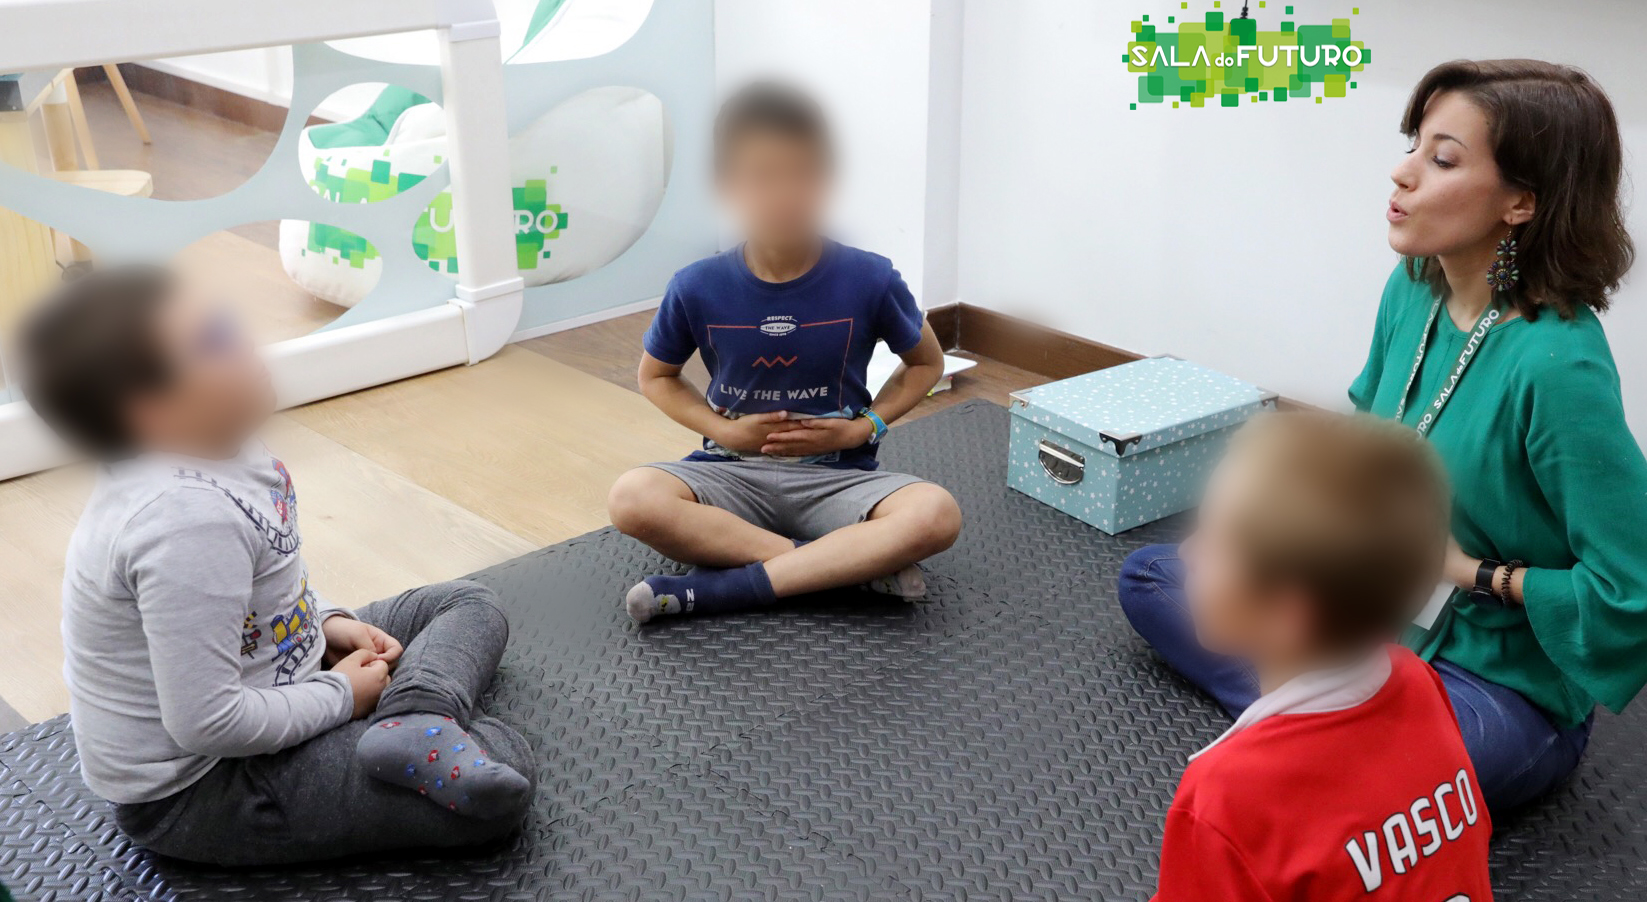 You are currently viewing ﻿Mindfulness na Sala do Futuro